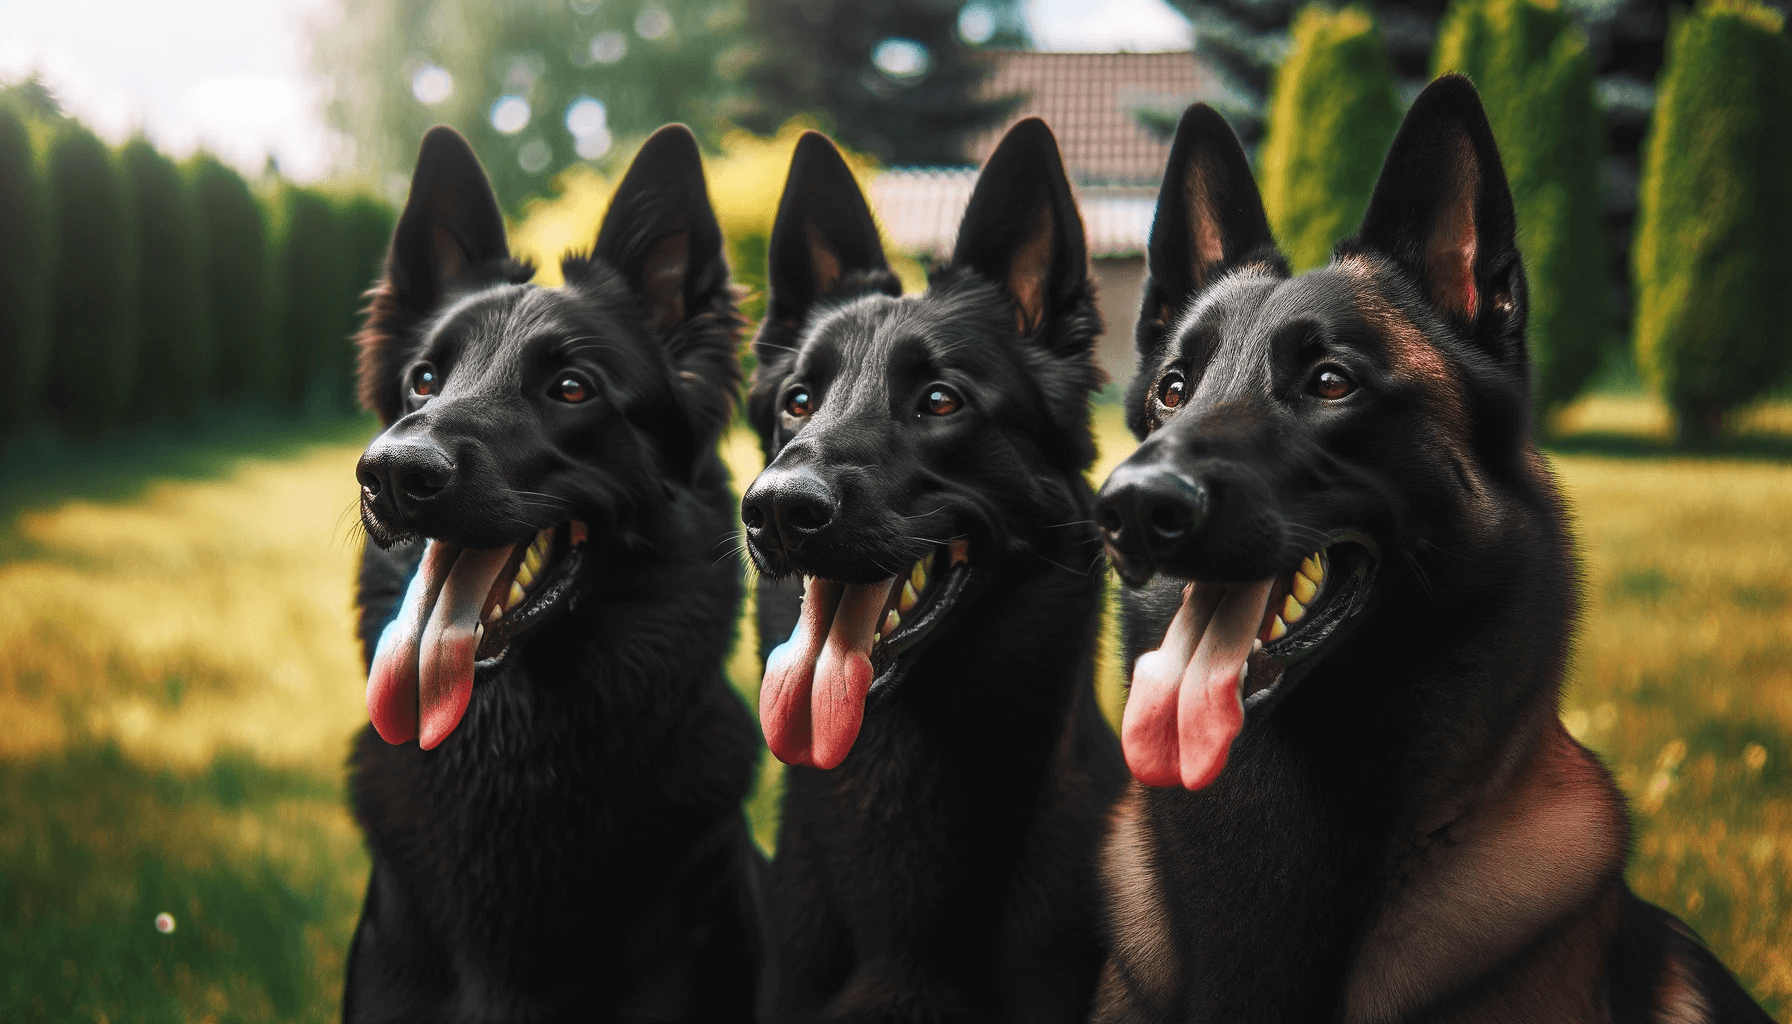 Rare Black Belgian Malinois standing side by side on grass, both with their tongues out and looking towards the right side of the frame.